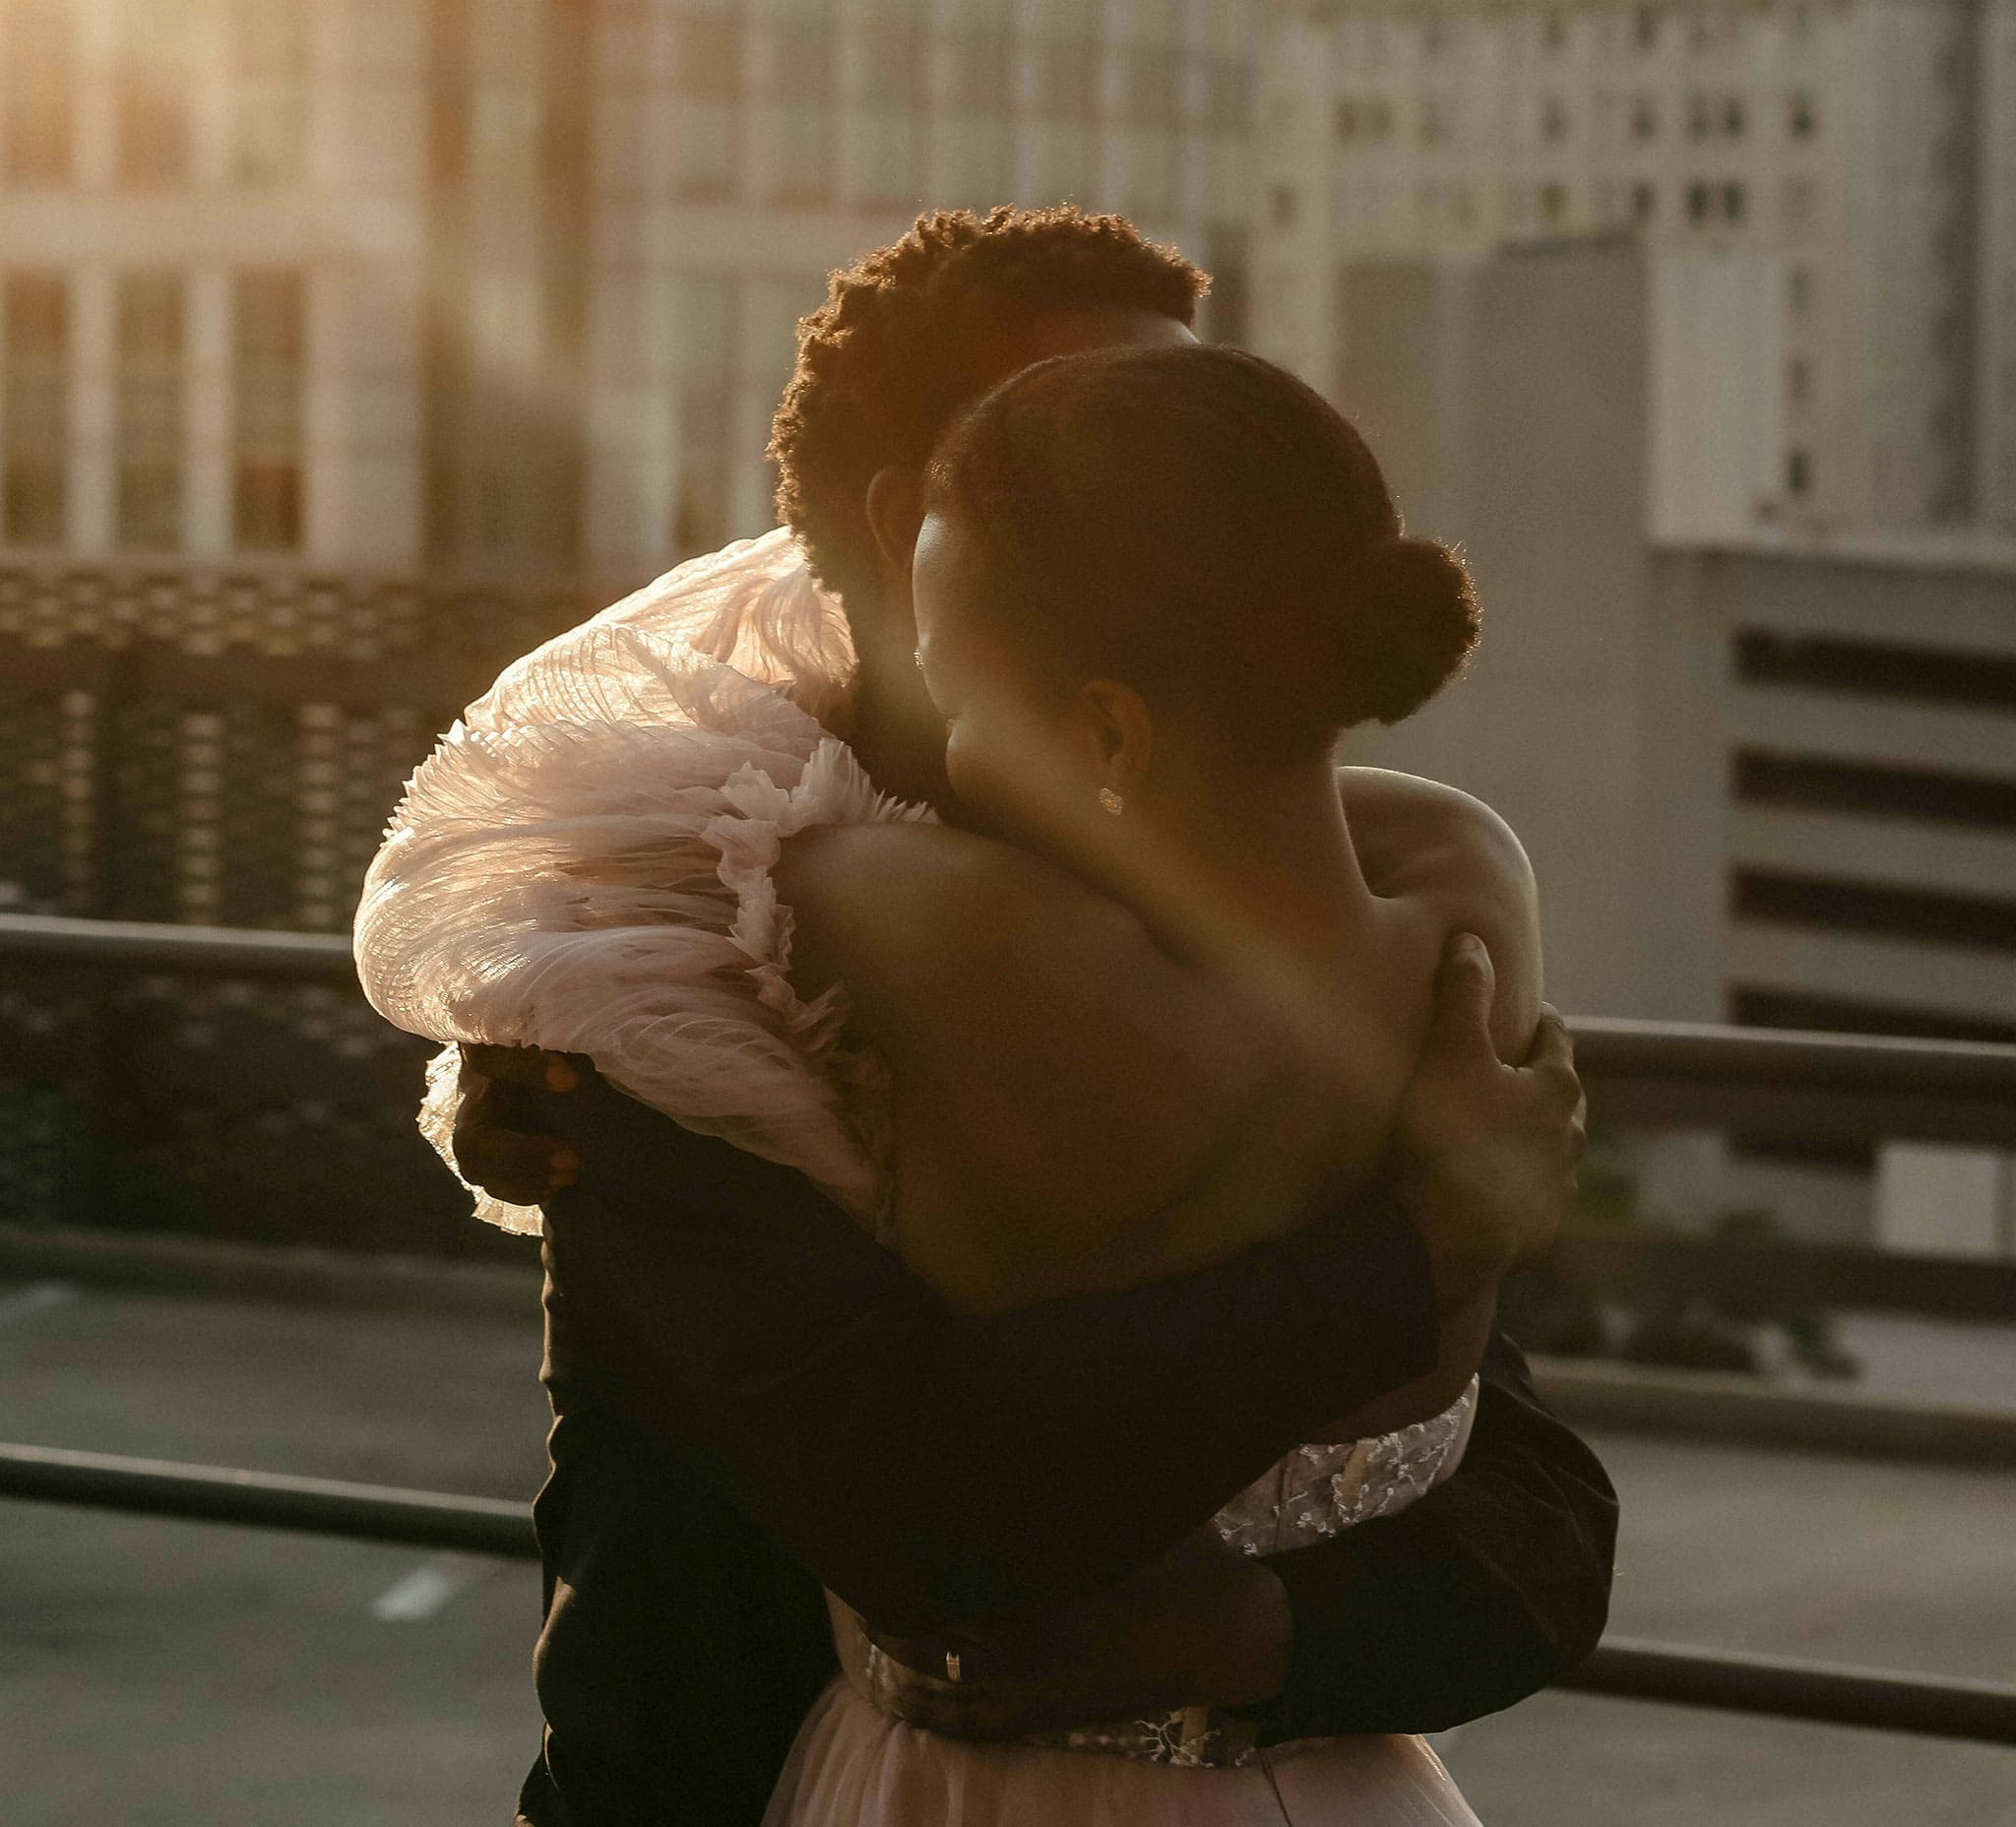 A young Black man and woman stand on a city balcony and hug each other tightly.